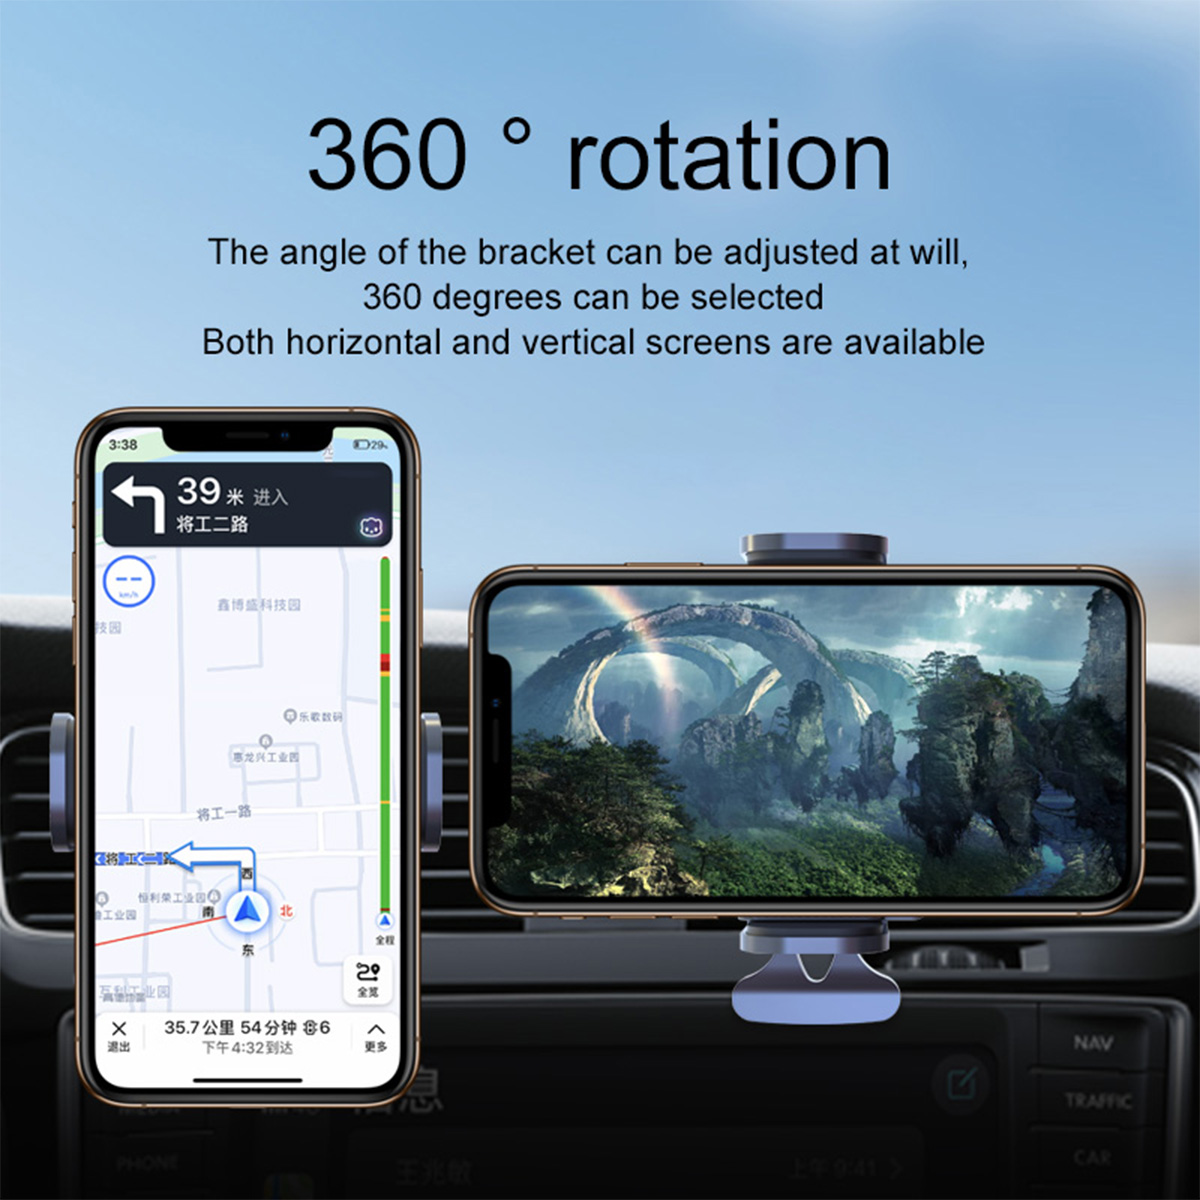 AUTSOME-300mAh-Car-Solar-Powered-Auto-Induction-Vehicle-Bracket-Mobile-Phone-Holder-Stand-for-iPhone-1885613-5